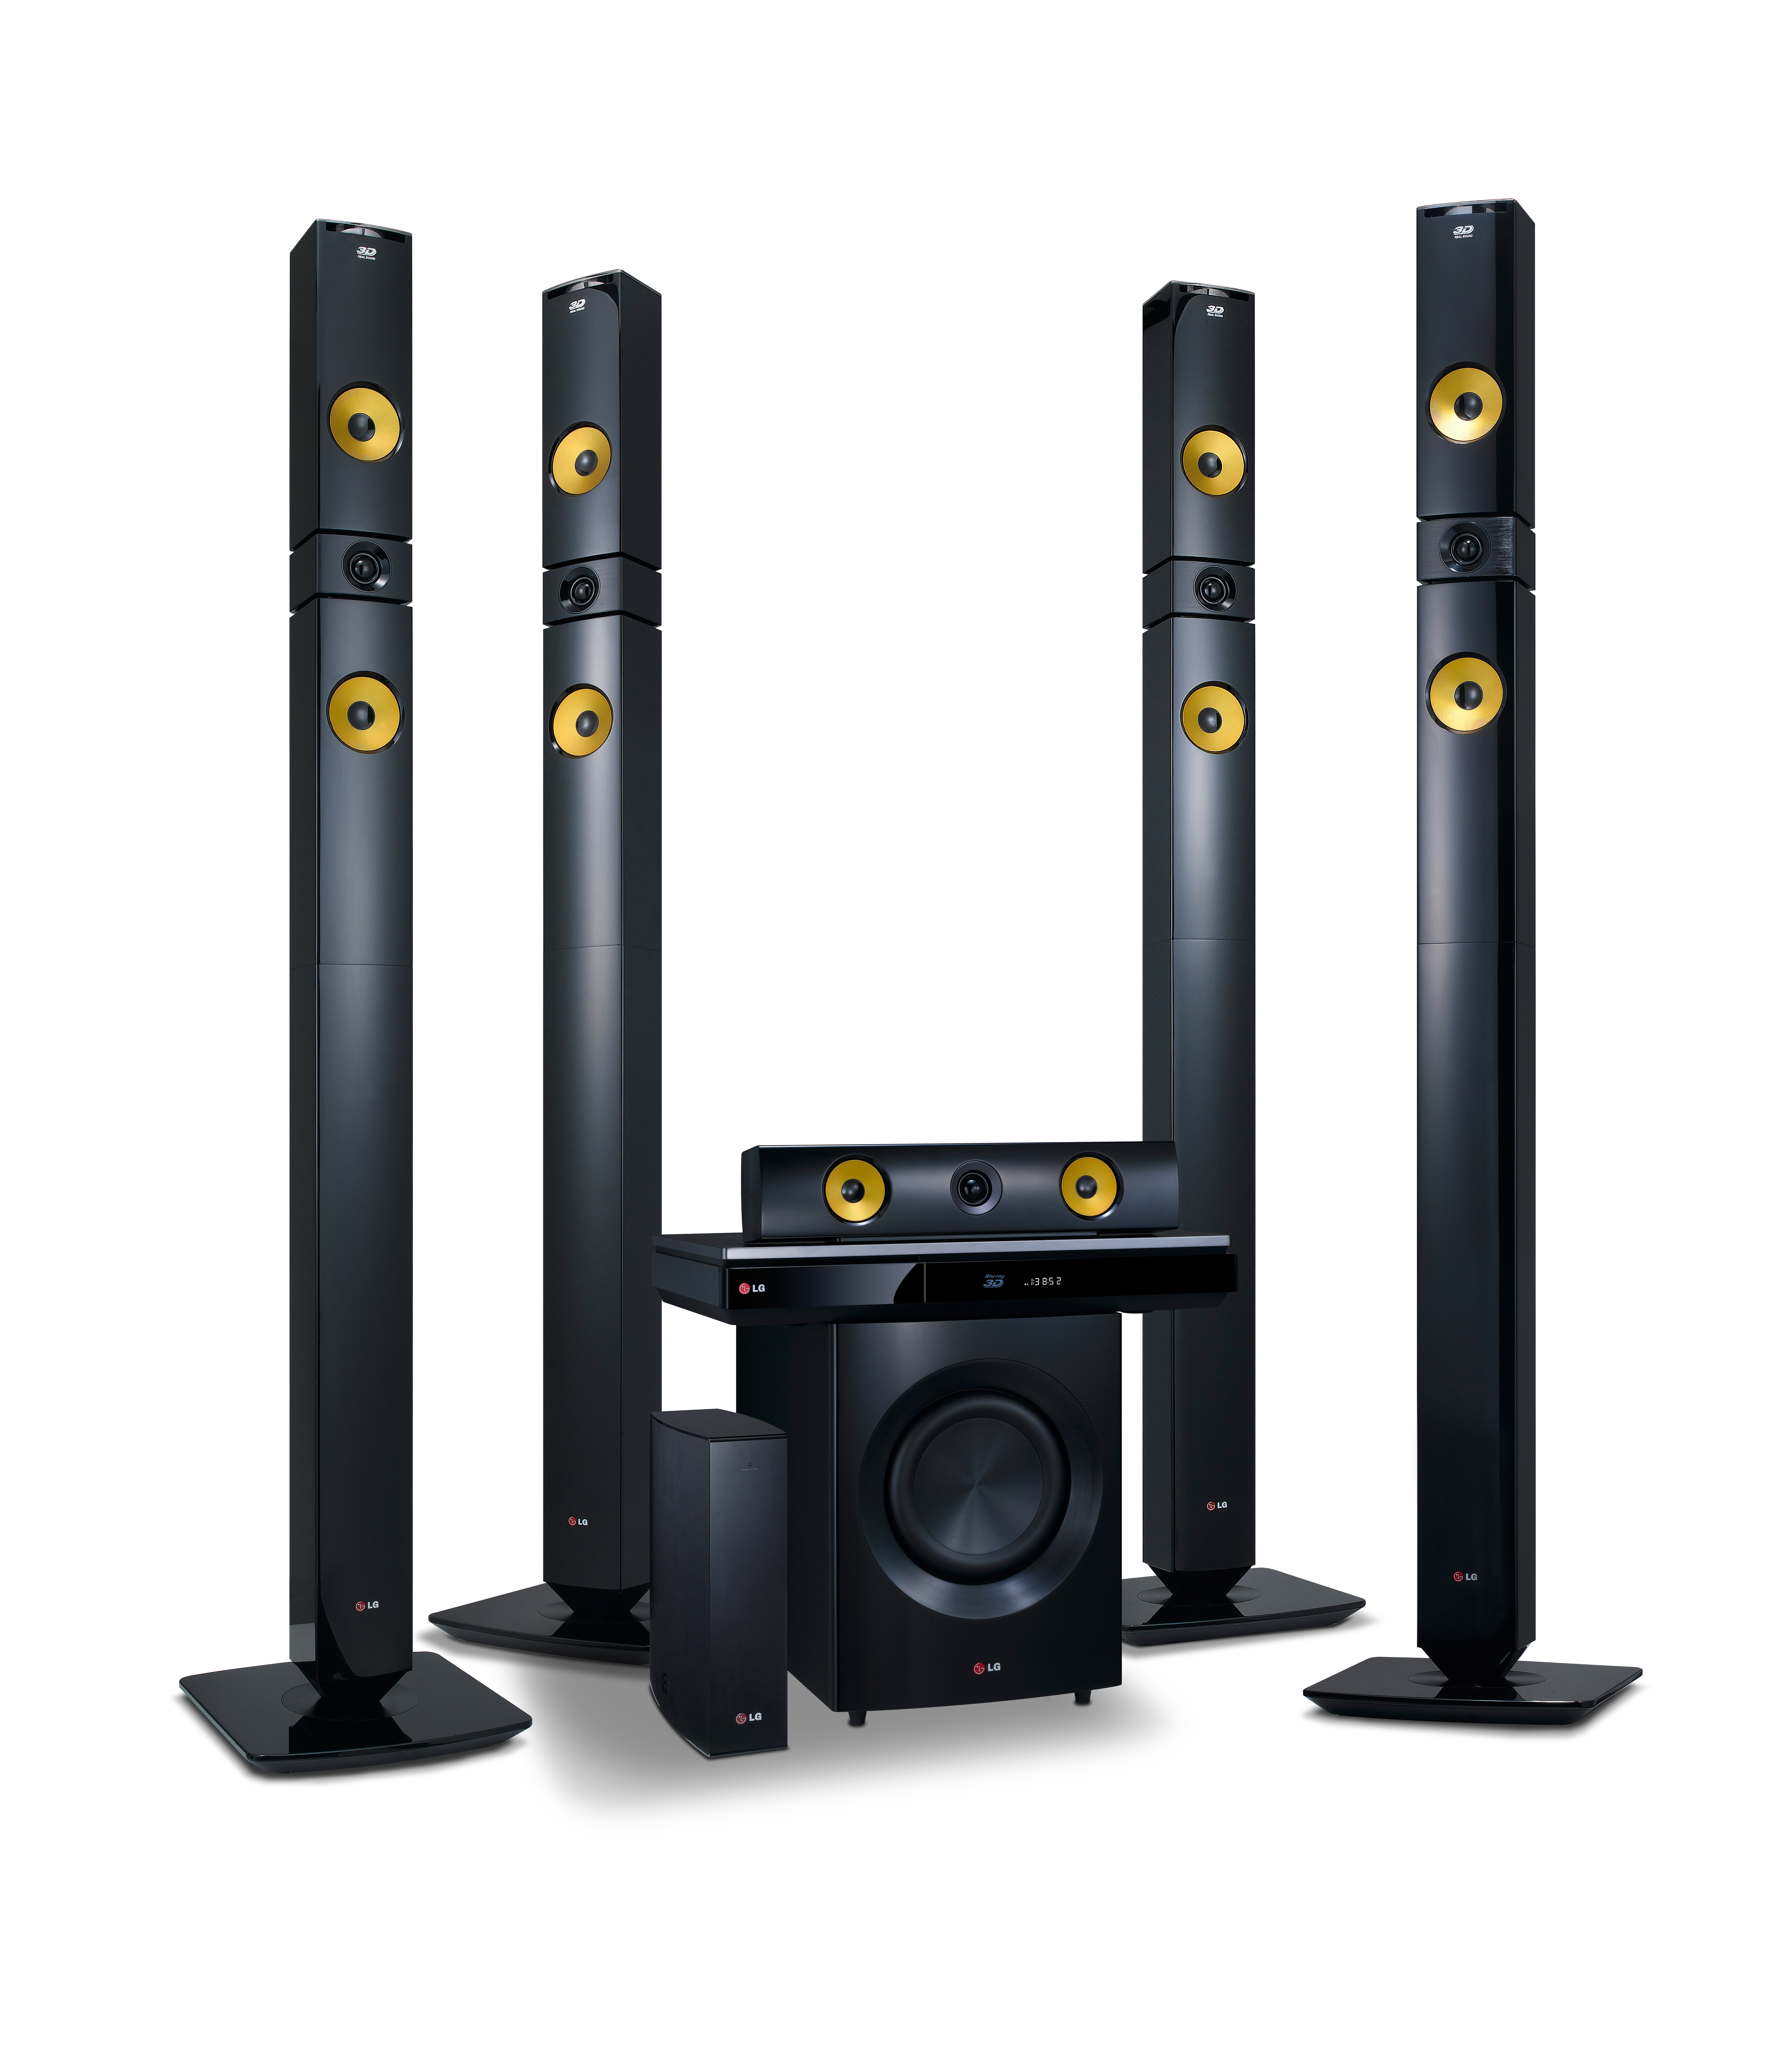 A left-side view of LG 2013 audio and video lineup including BH9430PW 9.1-channel speaker system, NB4530A Sound Bar, BP730 Blu-ray player with Smart TV features, the ND8630 Dual Docking Speaker and the NP6630 Portable Speaker.